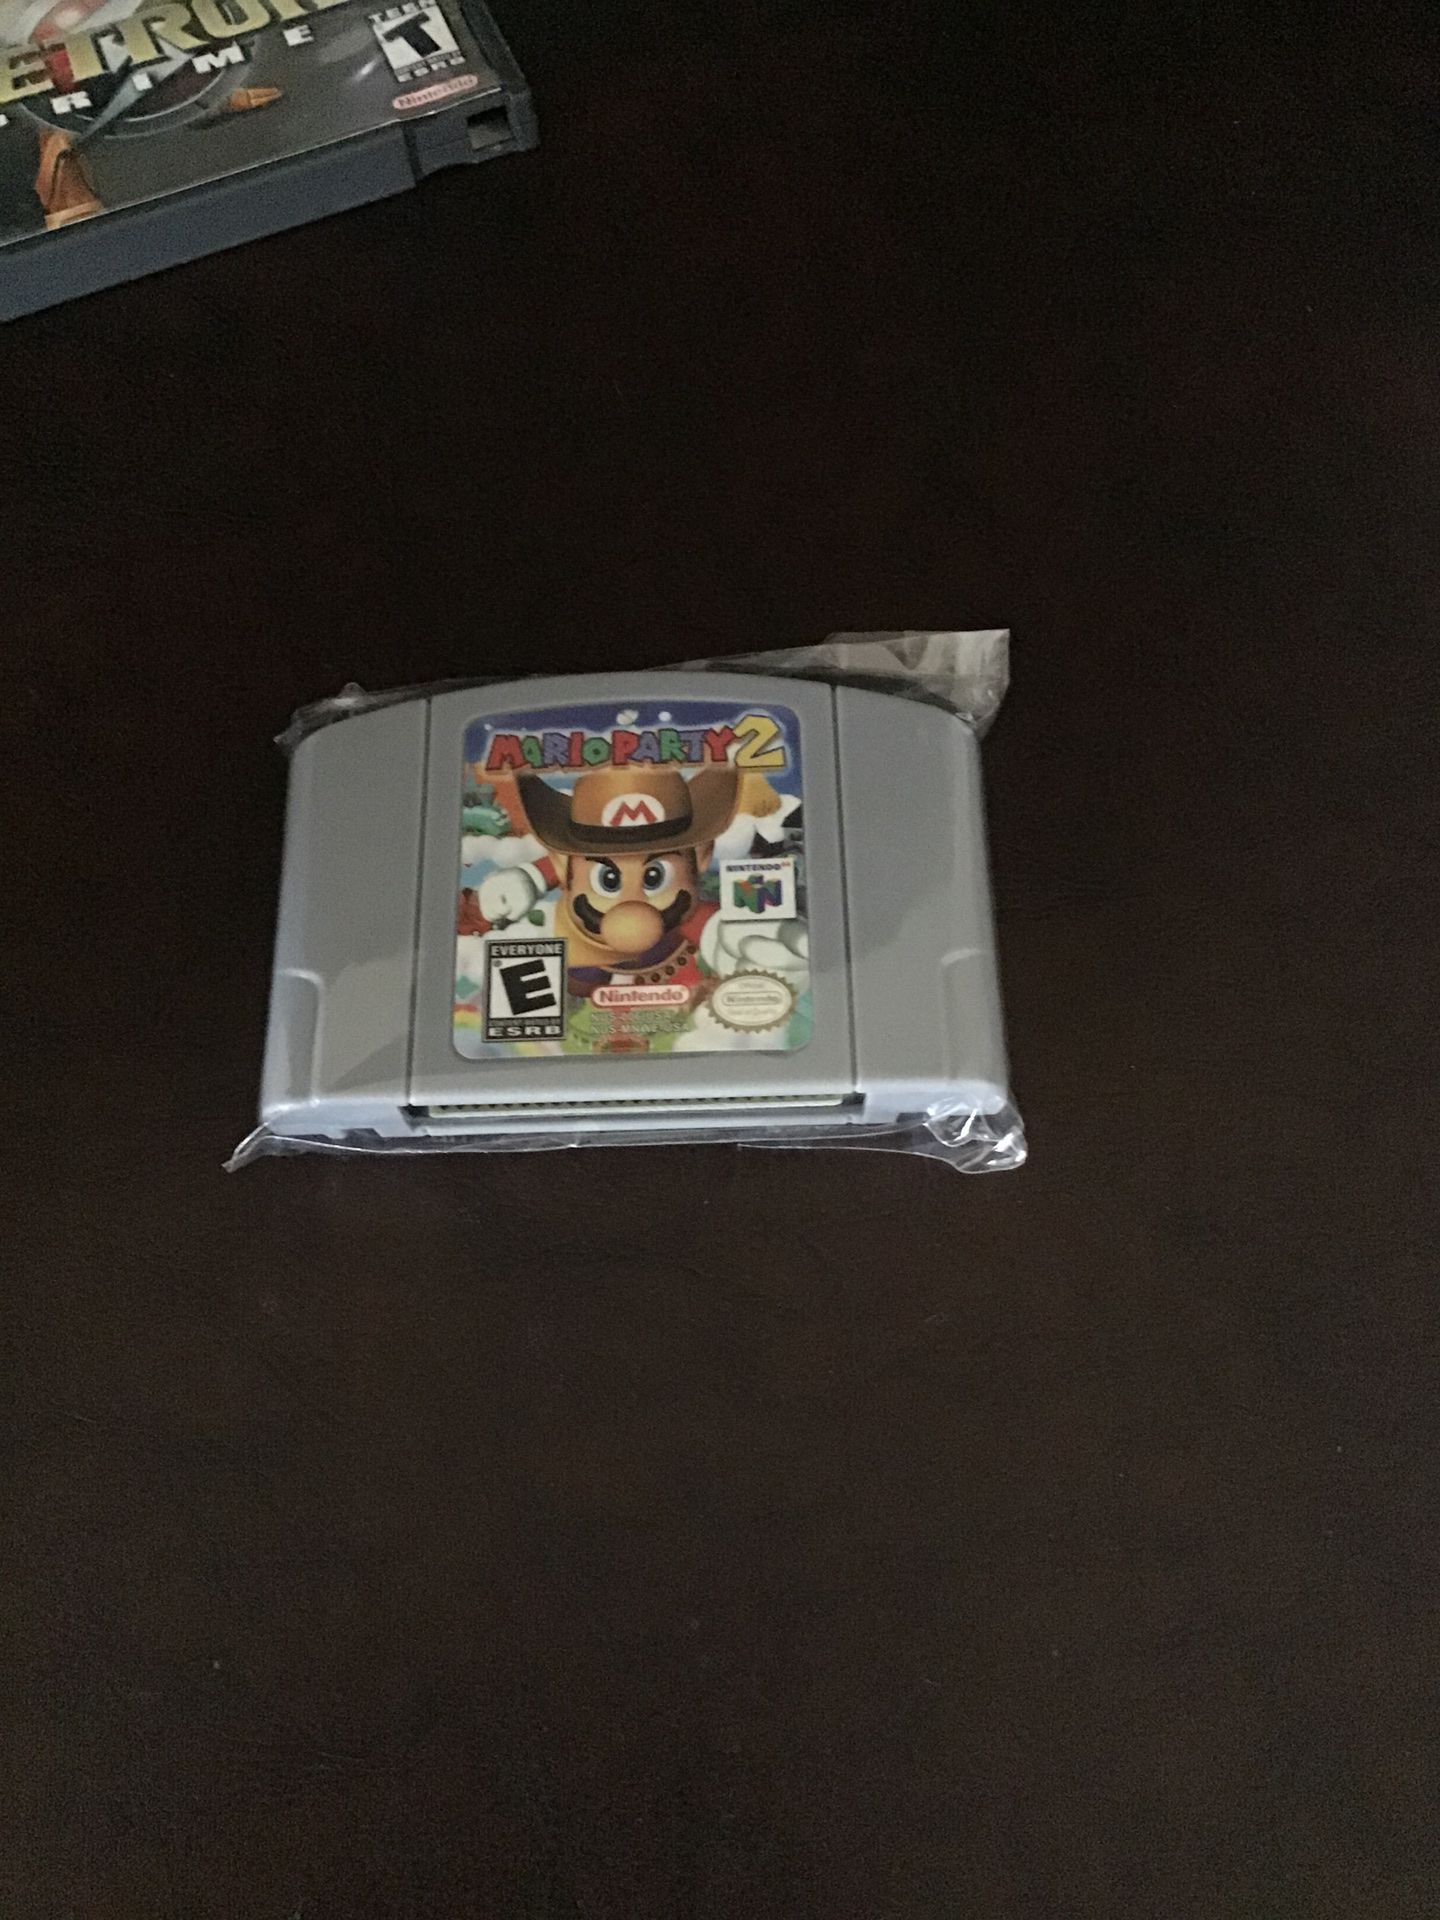 Mario party 2 for N64 game new repo